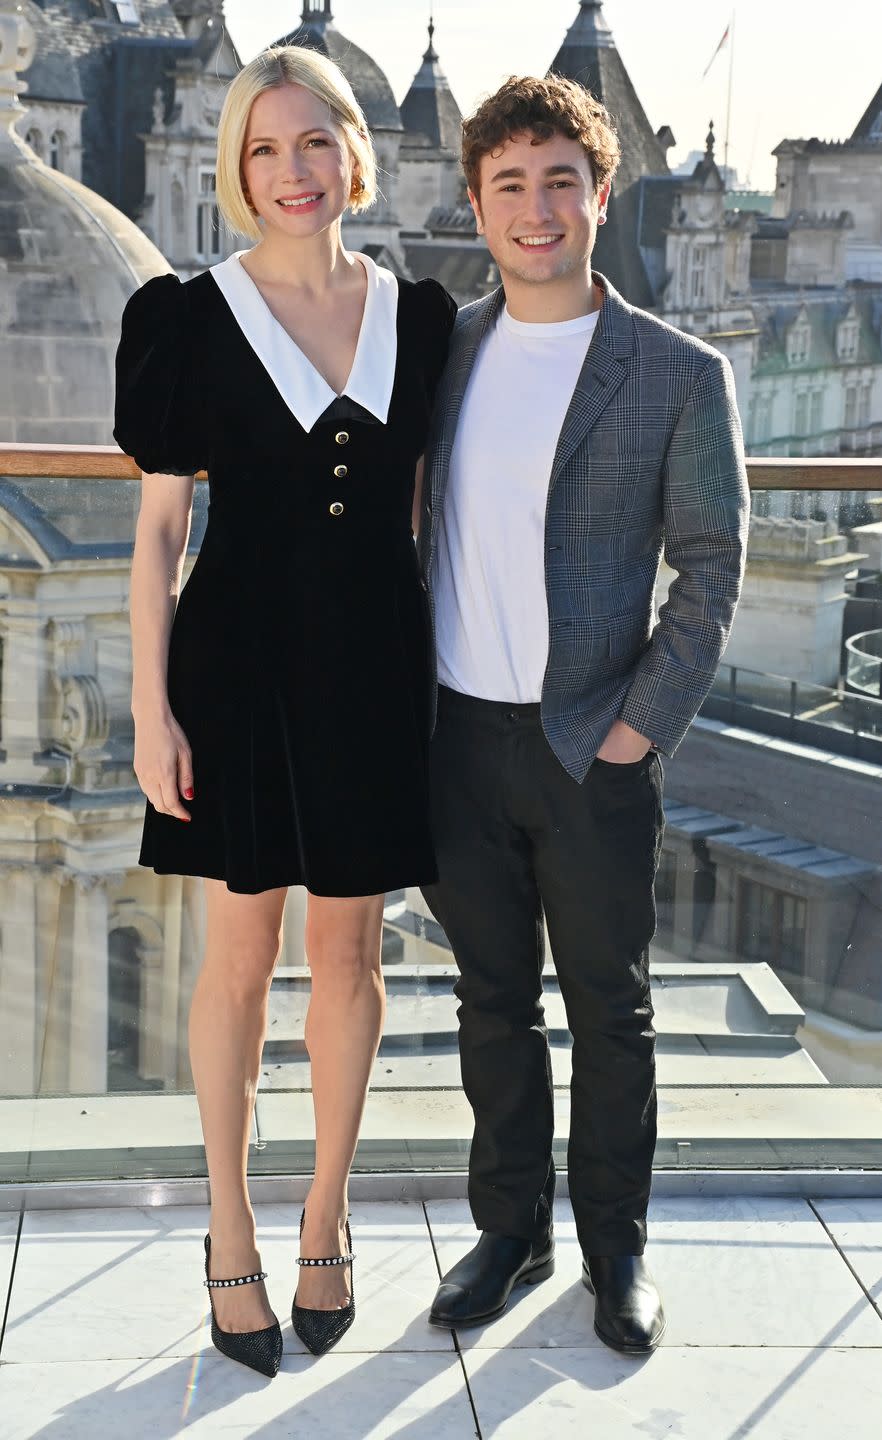 <span class="caption">Michelle Williams and Gabriel LaBelle attend the London photocall for "The Fabelmans" at the Corinthia Hotel London on January 19, 2023 in London, England.</span><span class="photo-credit">David M. Benett - Getty Images</span>